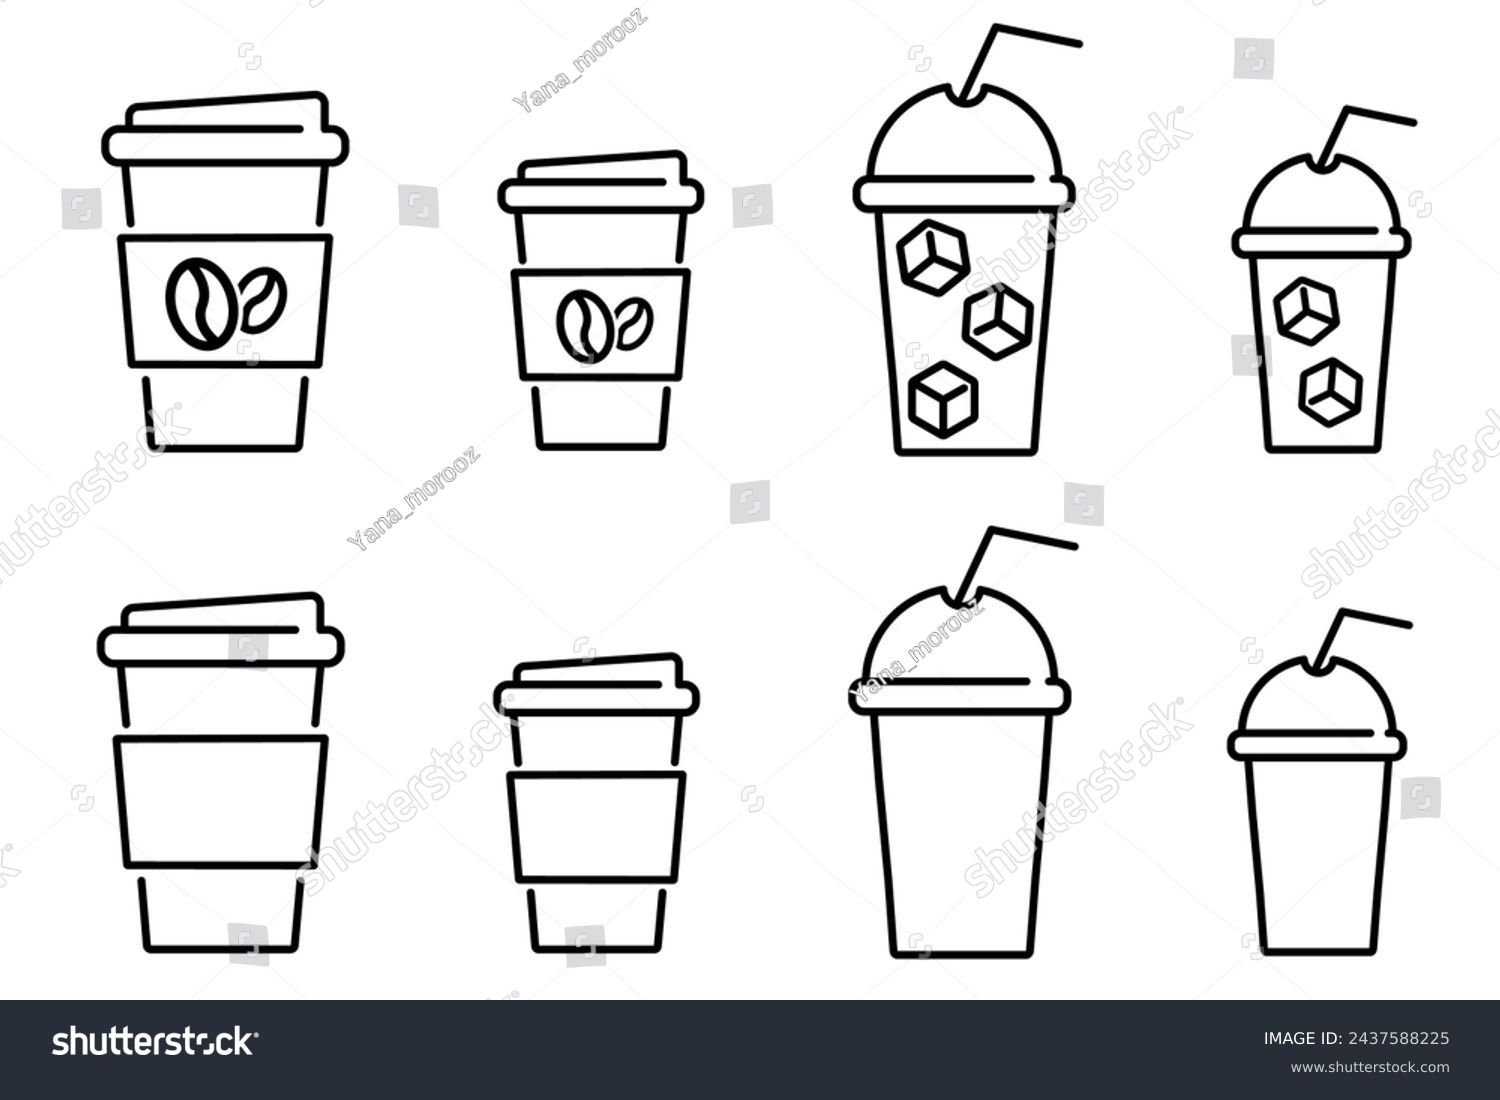 SVG of Hot and cold drinks icon set. Paper coffee cup different size sign. Disposable plastic cup with straw for iced coffee symbol. svg